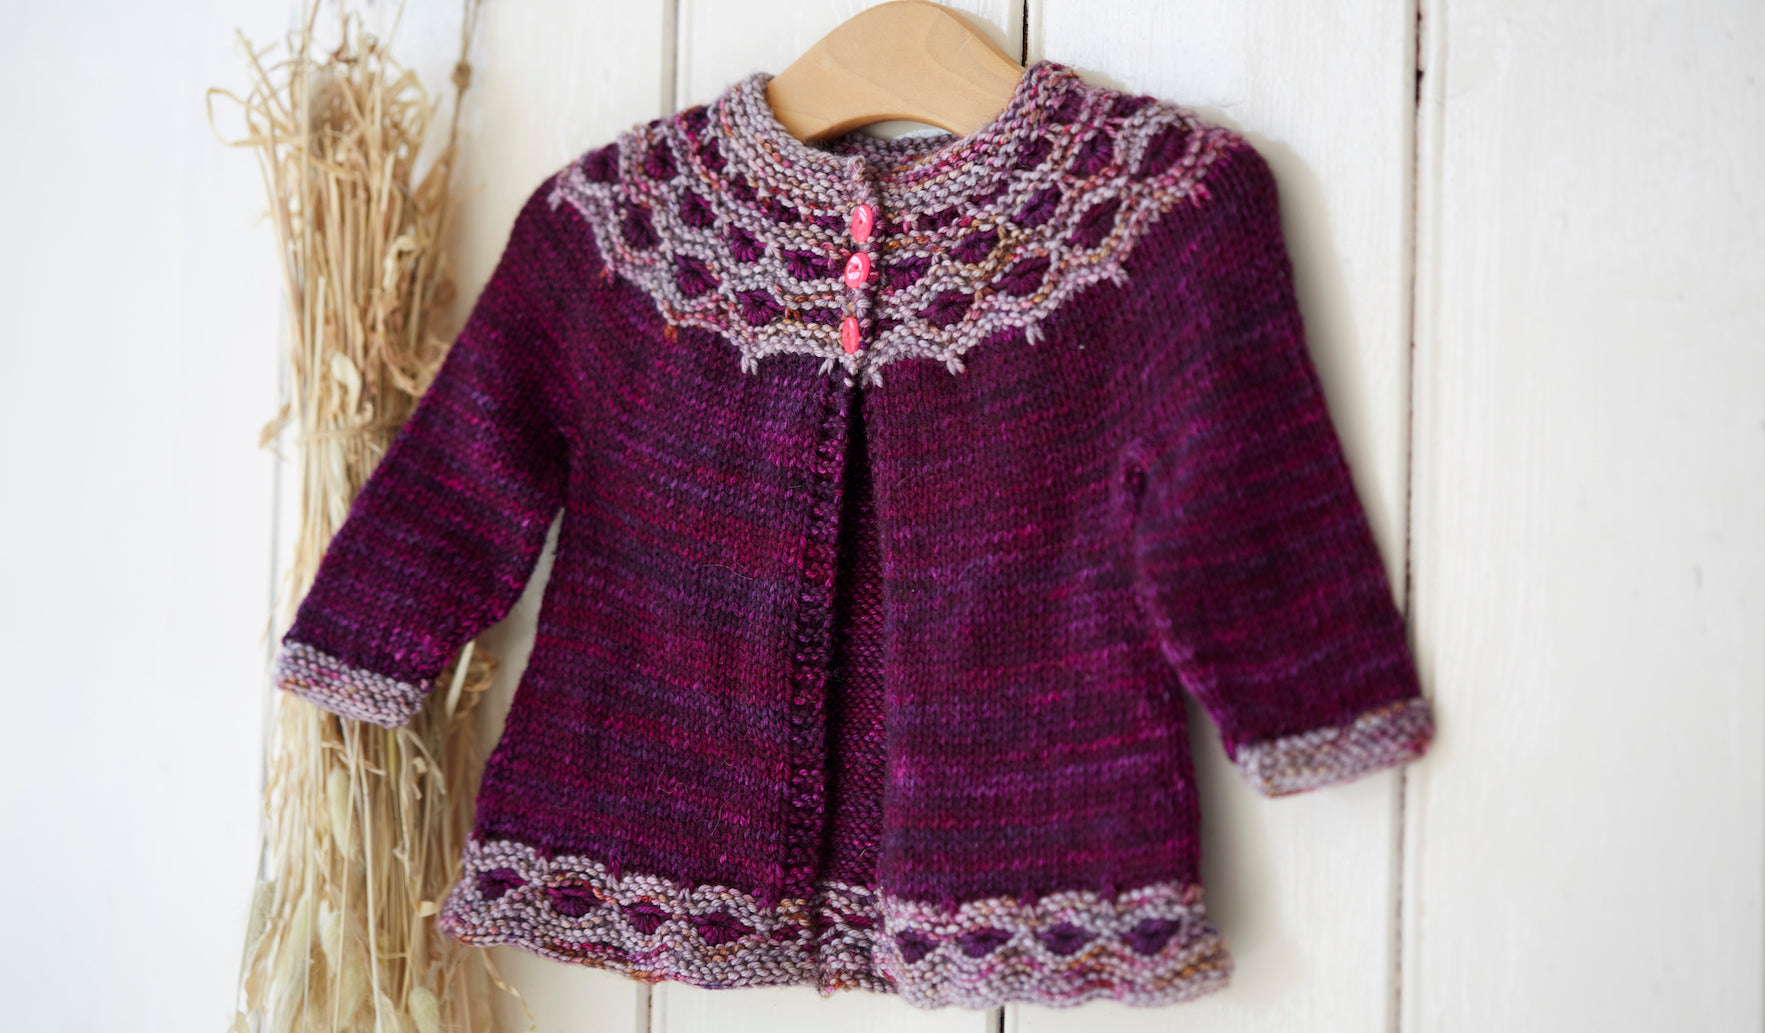 Craft Tool Knitting Patterns- In the Loop Knitting